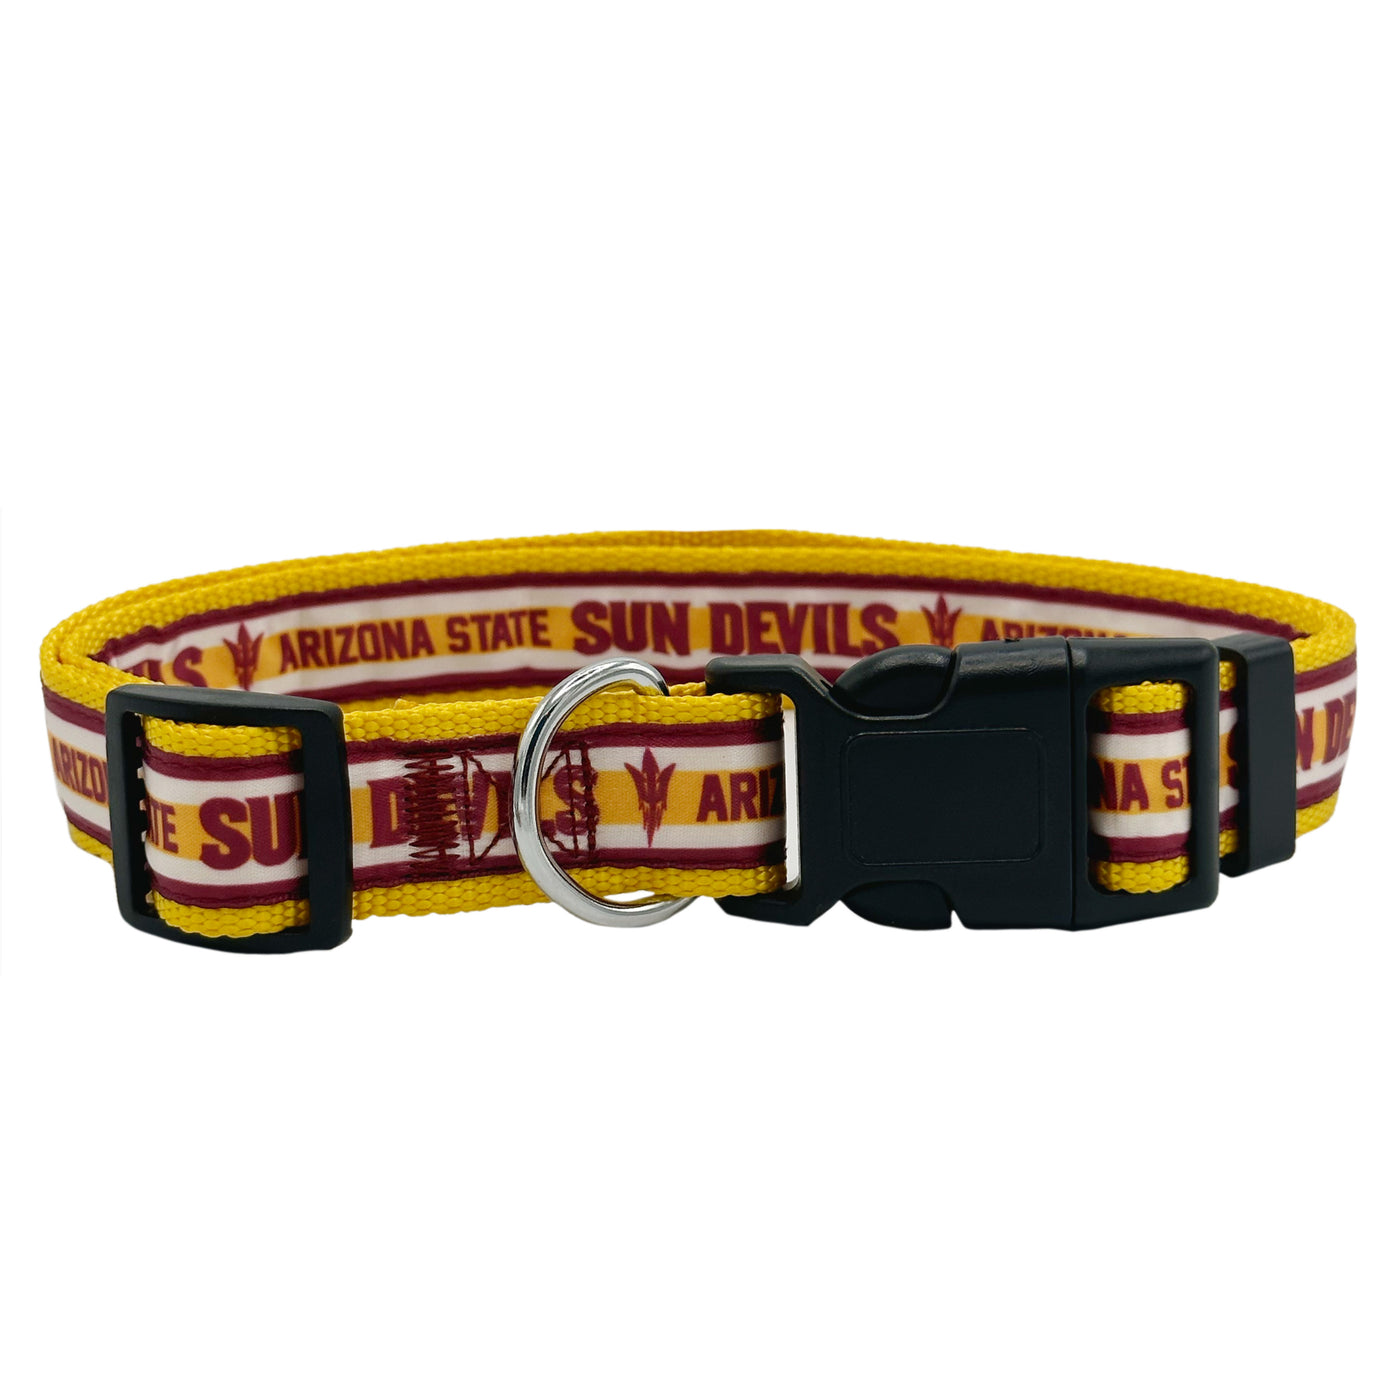 ASU striped dog collar with the colors white, maroon, and gold. The text 